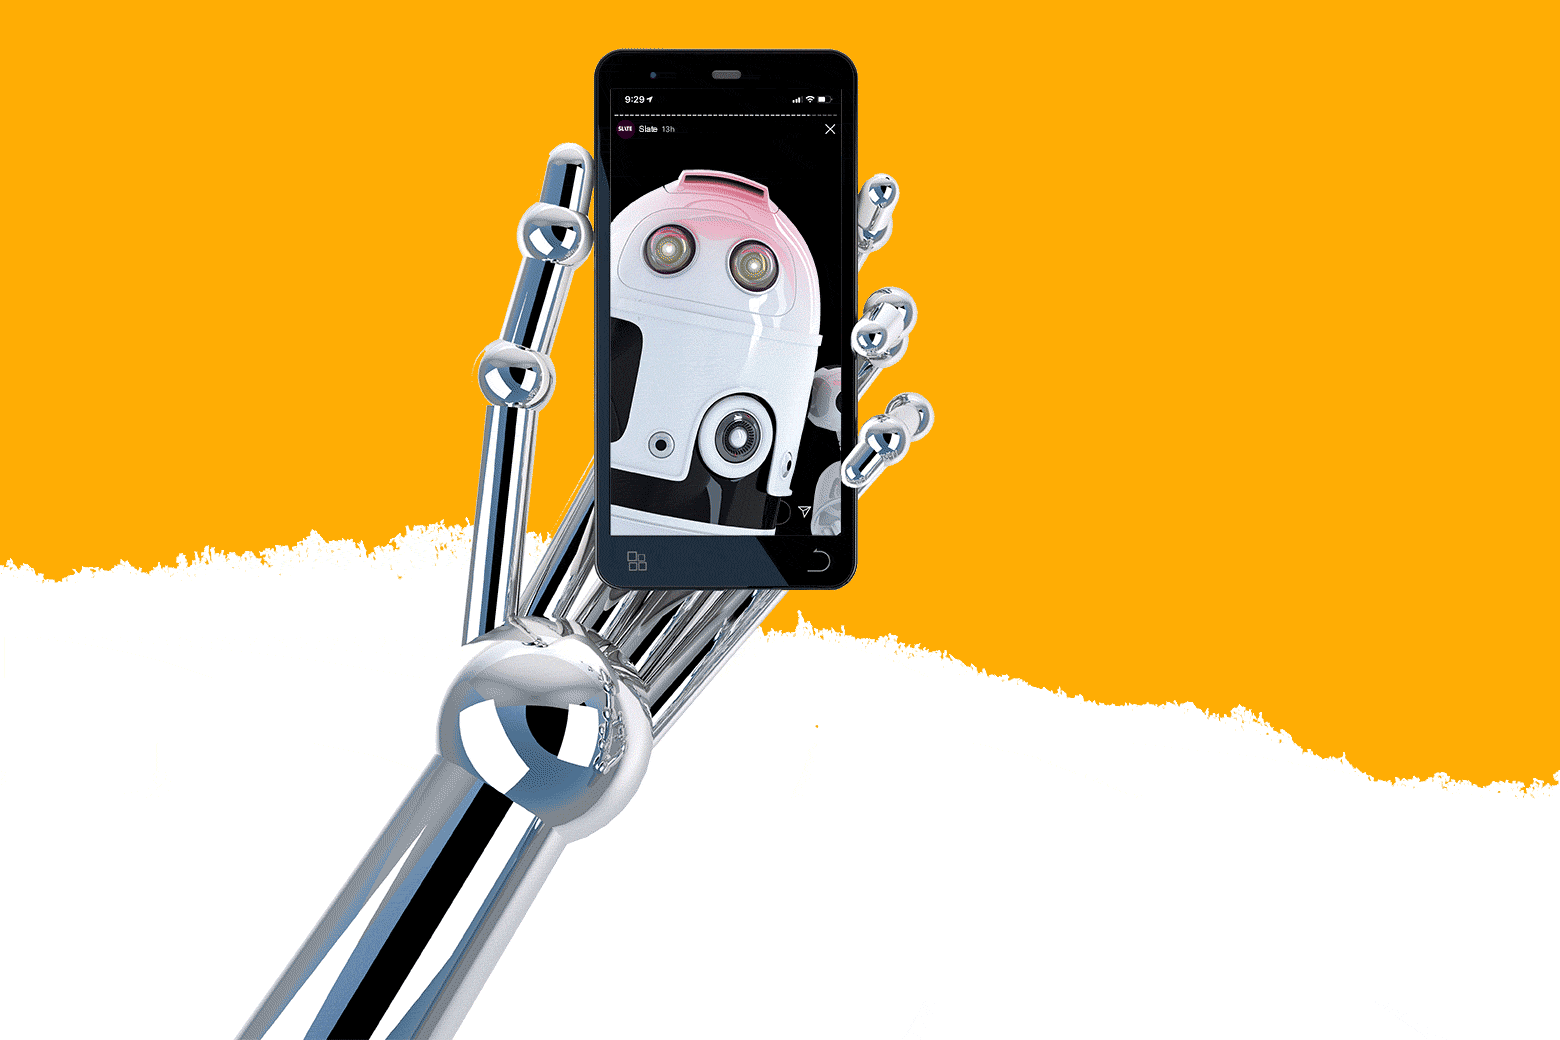 Robot watching an Instagram story on a phone.